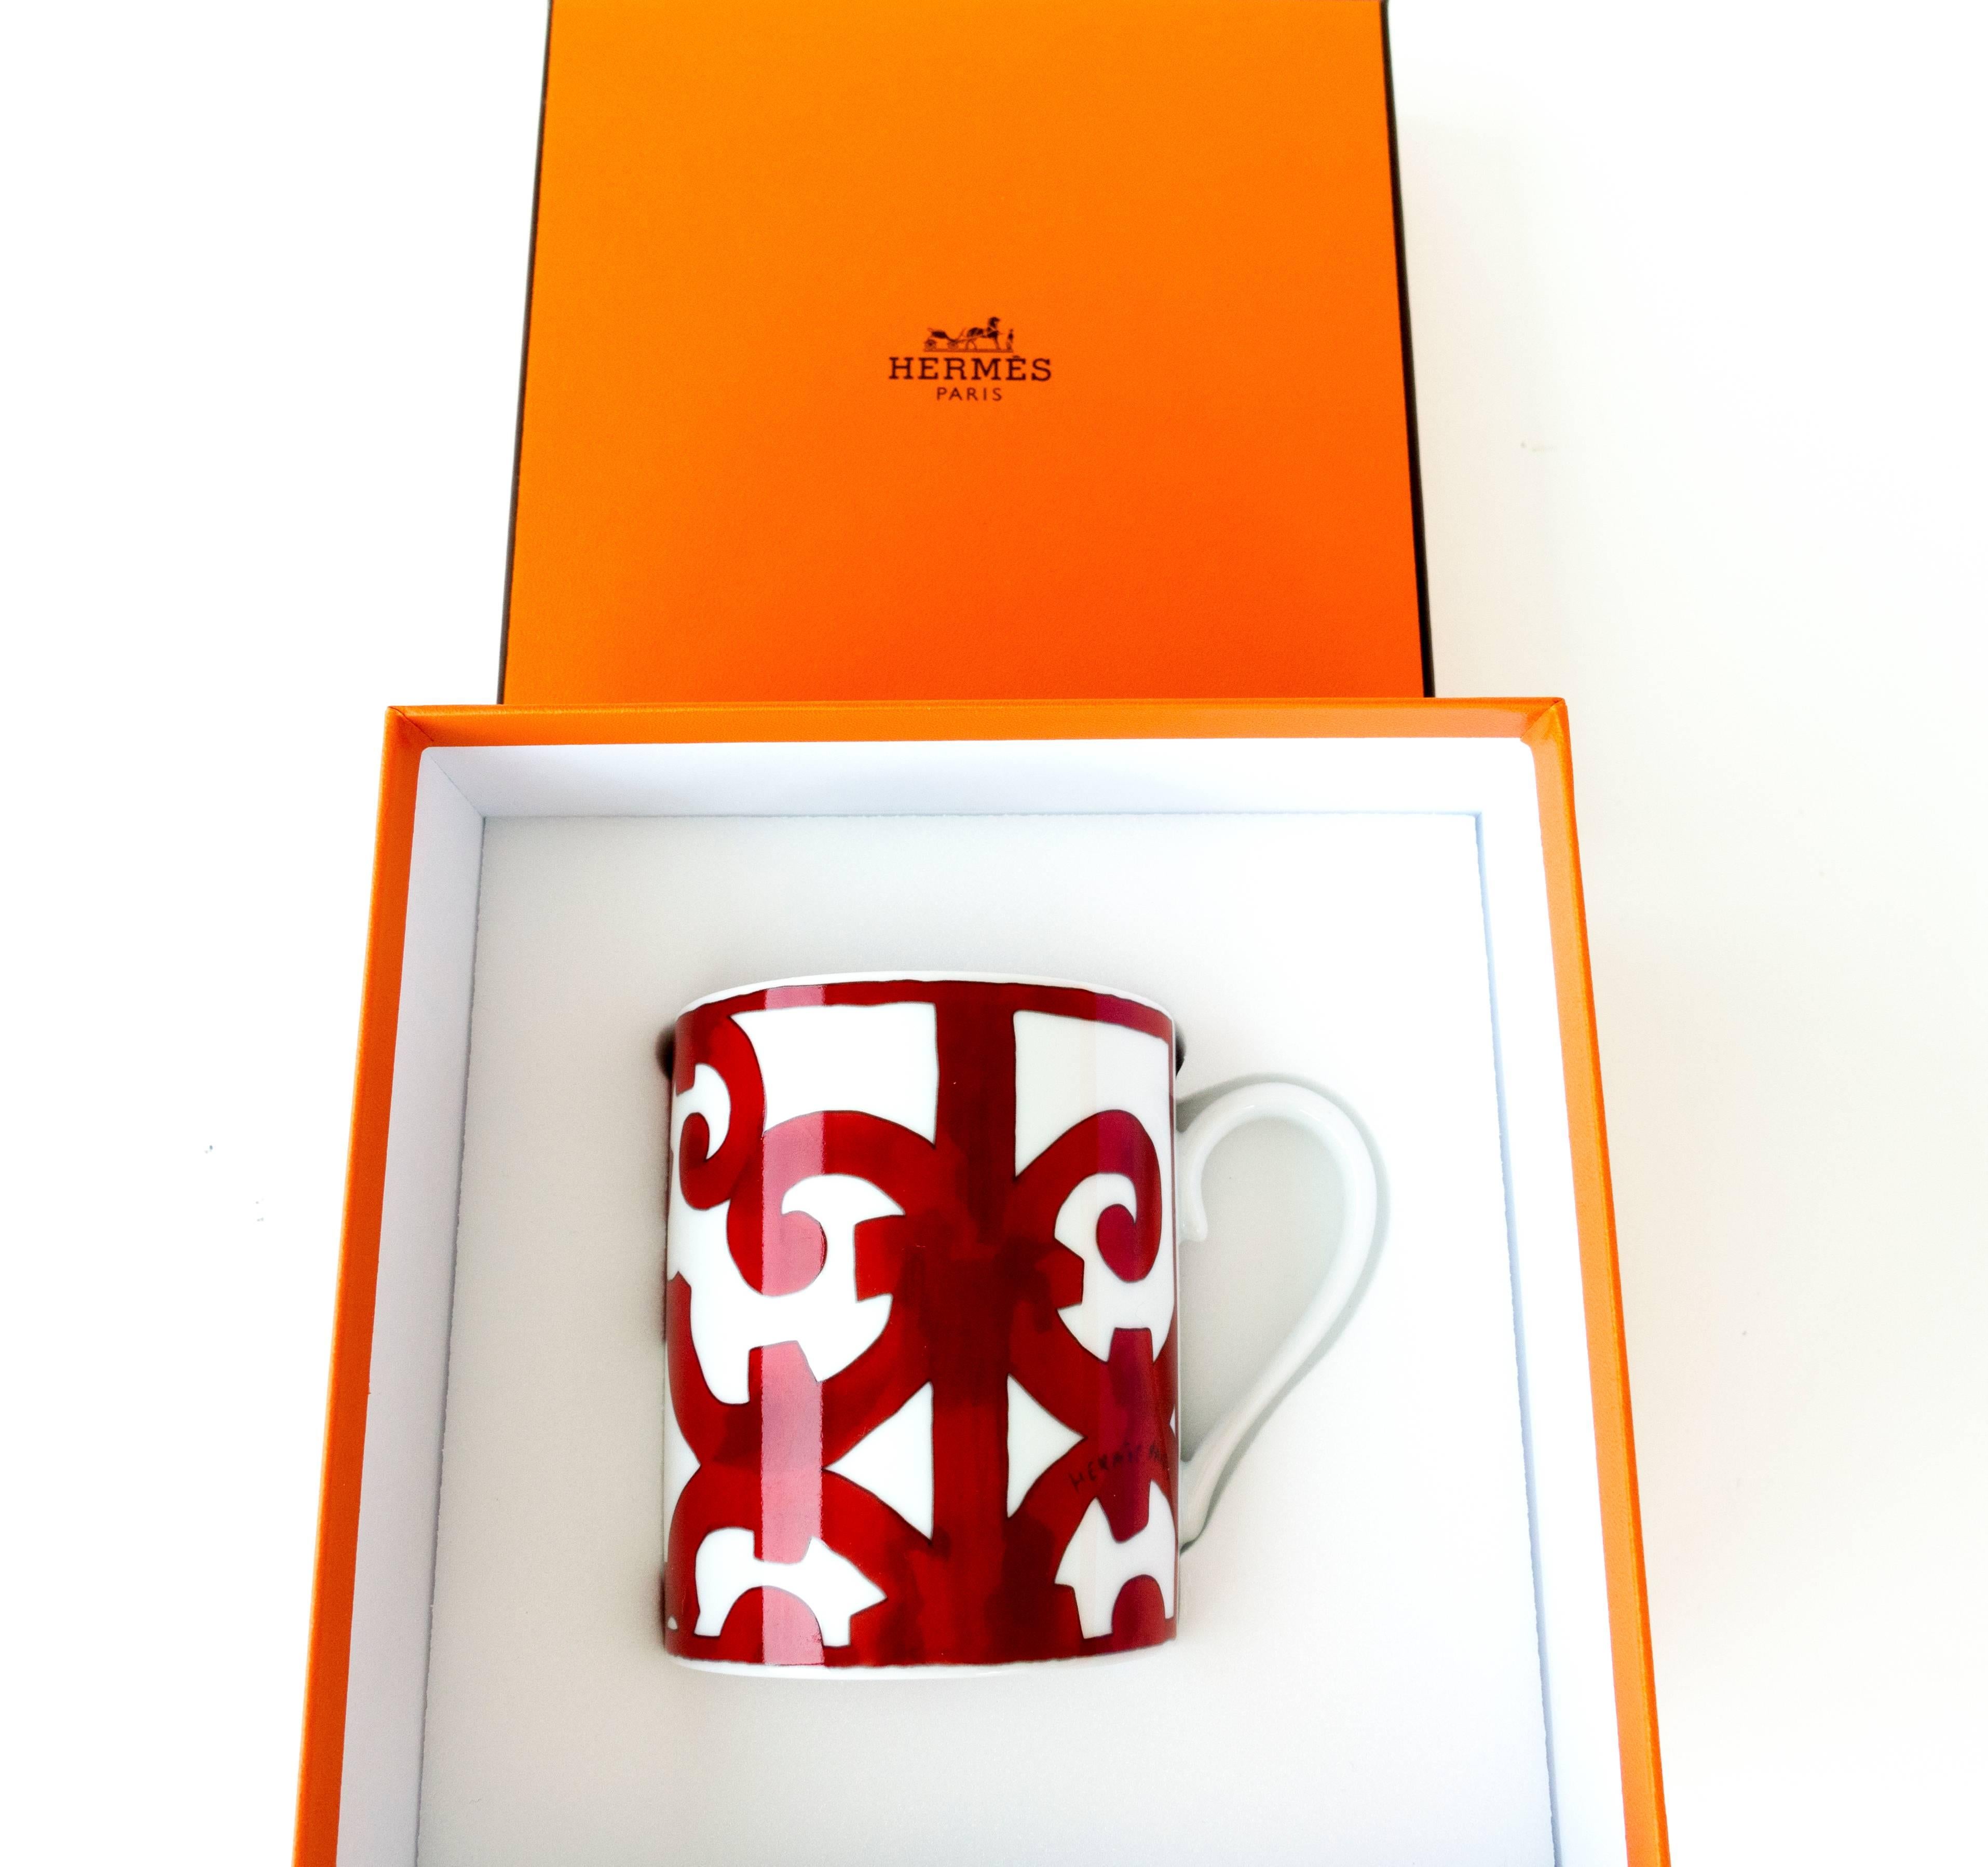 Hermes Balcon du Guadalquivir Porcelain Coffee Mug
Brand New in Box.  Store fresh.  Pristine condition.
Below $180 retail including tax where we are.
Perfect gift!  Comes with Hermes mug gift box set.  
Bold graphic red and white porcelain